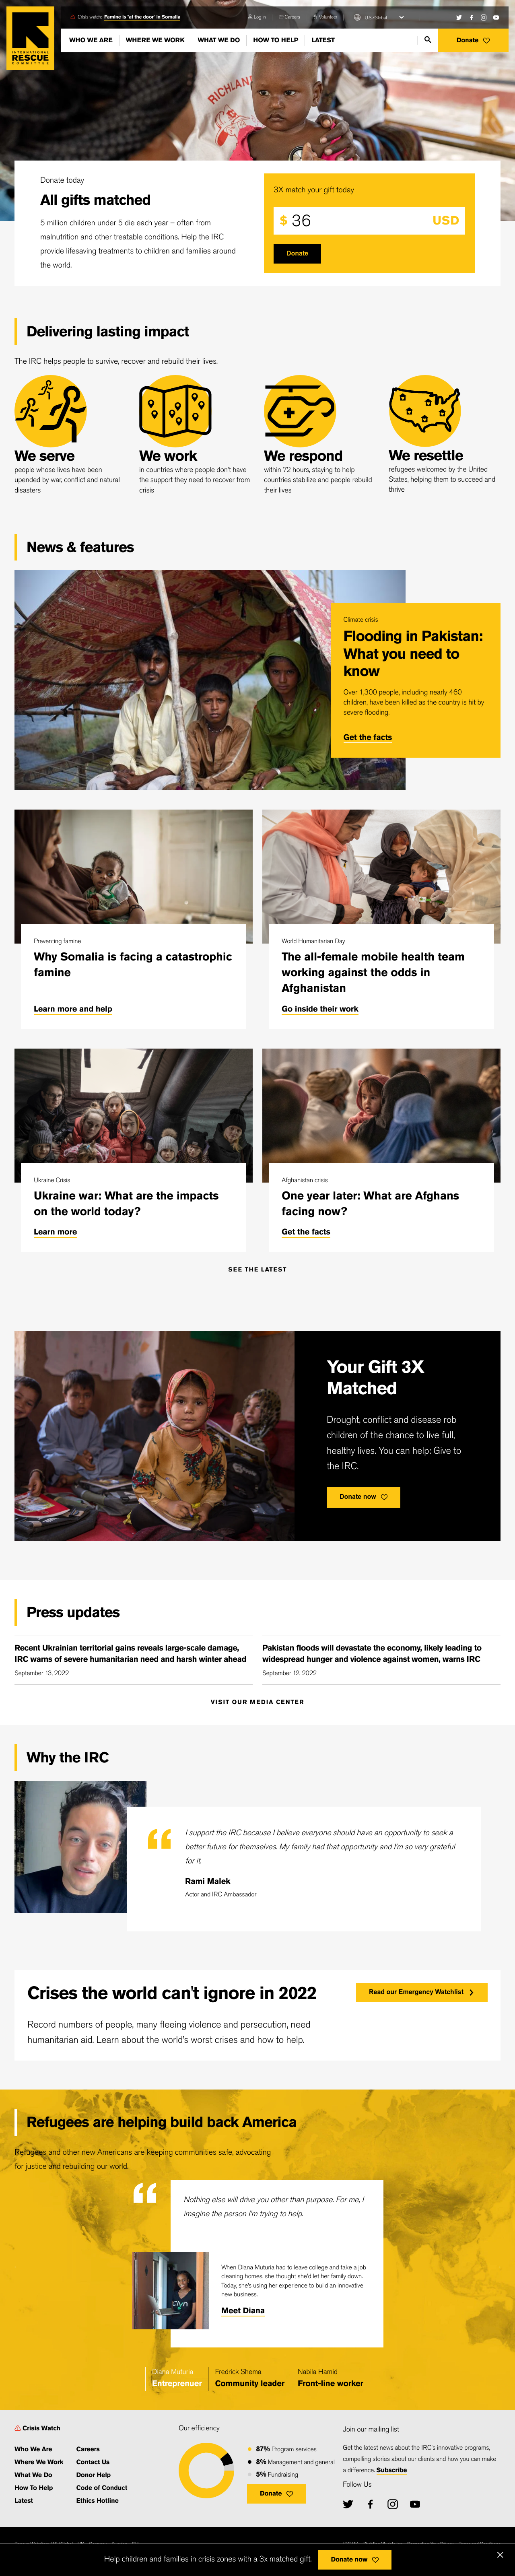 nonprofit landing page example of International Rescue Committee | International Rescue Committee (IRC)